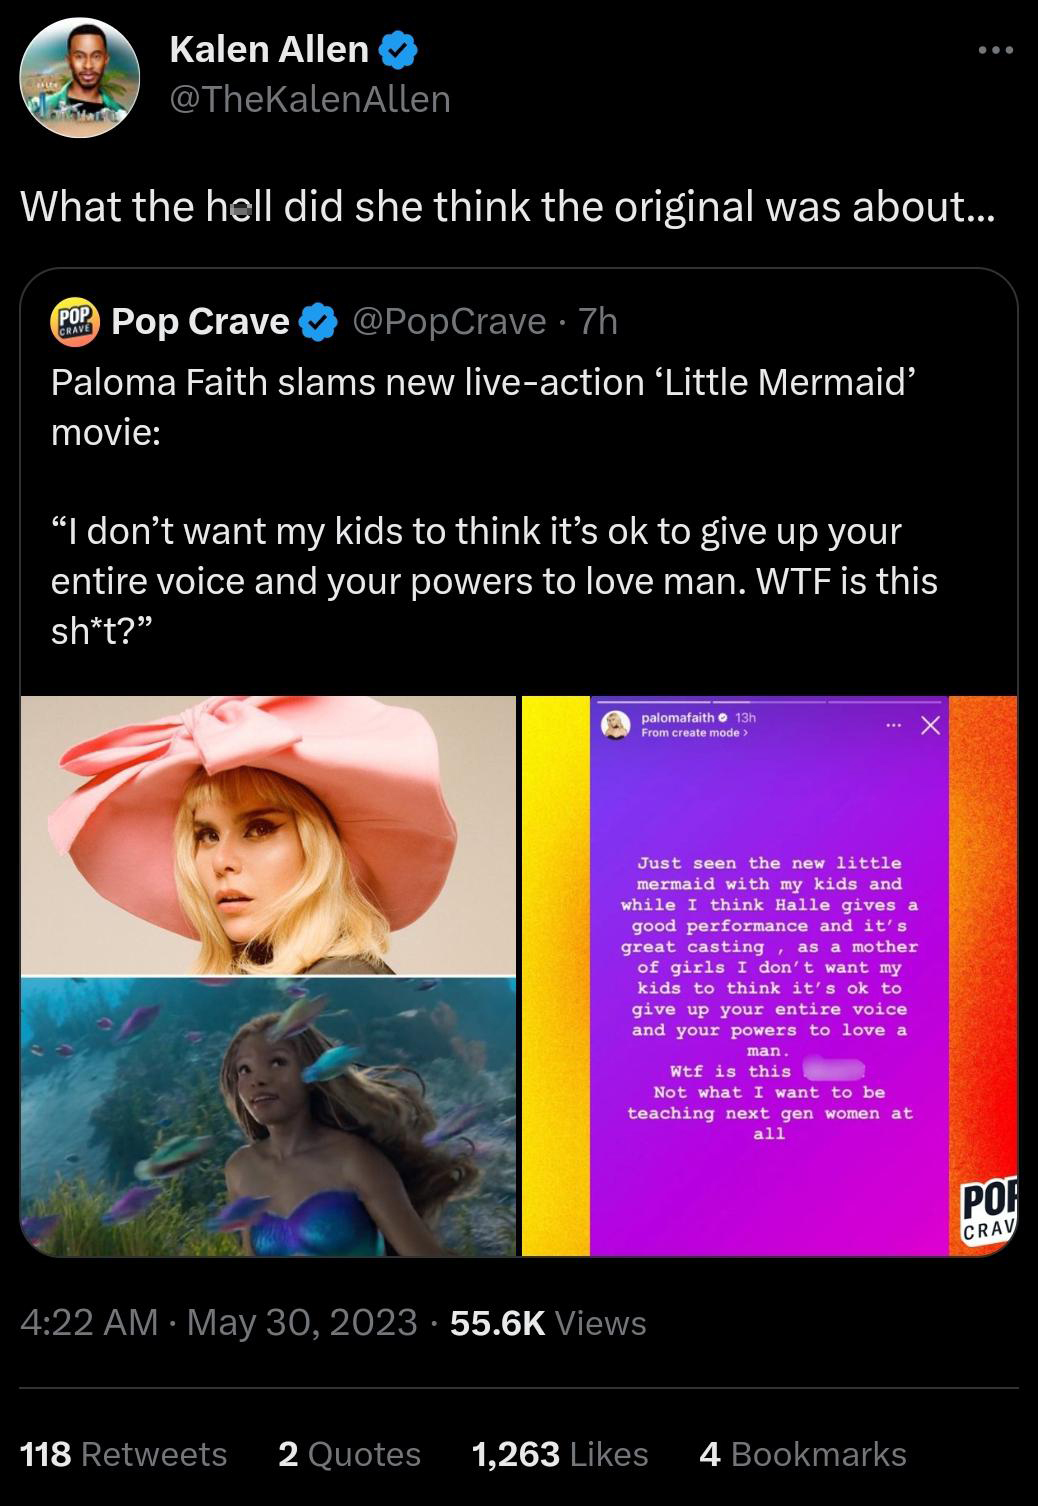 funniest tweets of the week - video - Kalen Allen What the hell did she think the original was about... Pop Crave 7h Paloma Faith slams new liveaction "Little Mermaid' movie "I don't want my kids to think it's ok to give up your entire voice and your powe